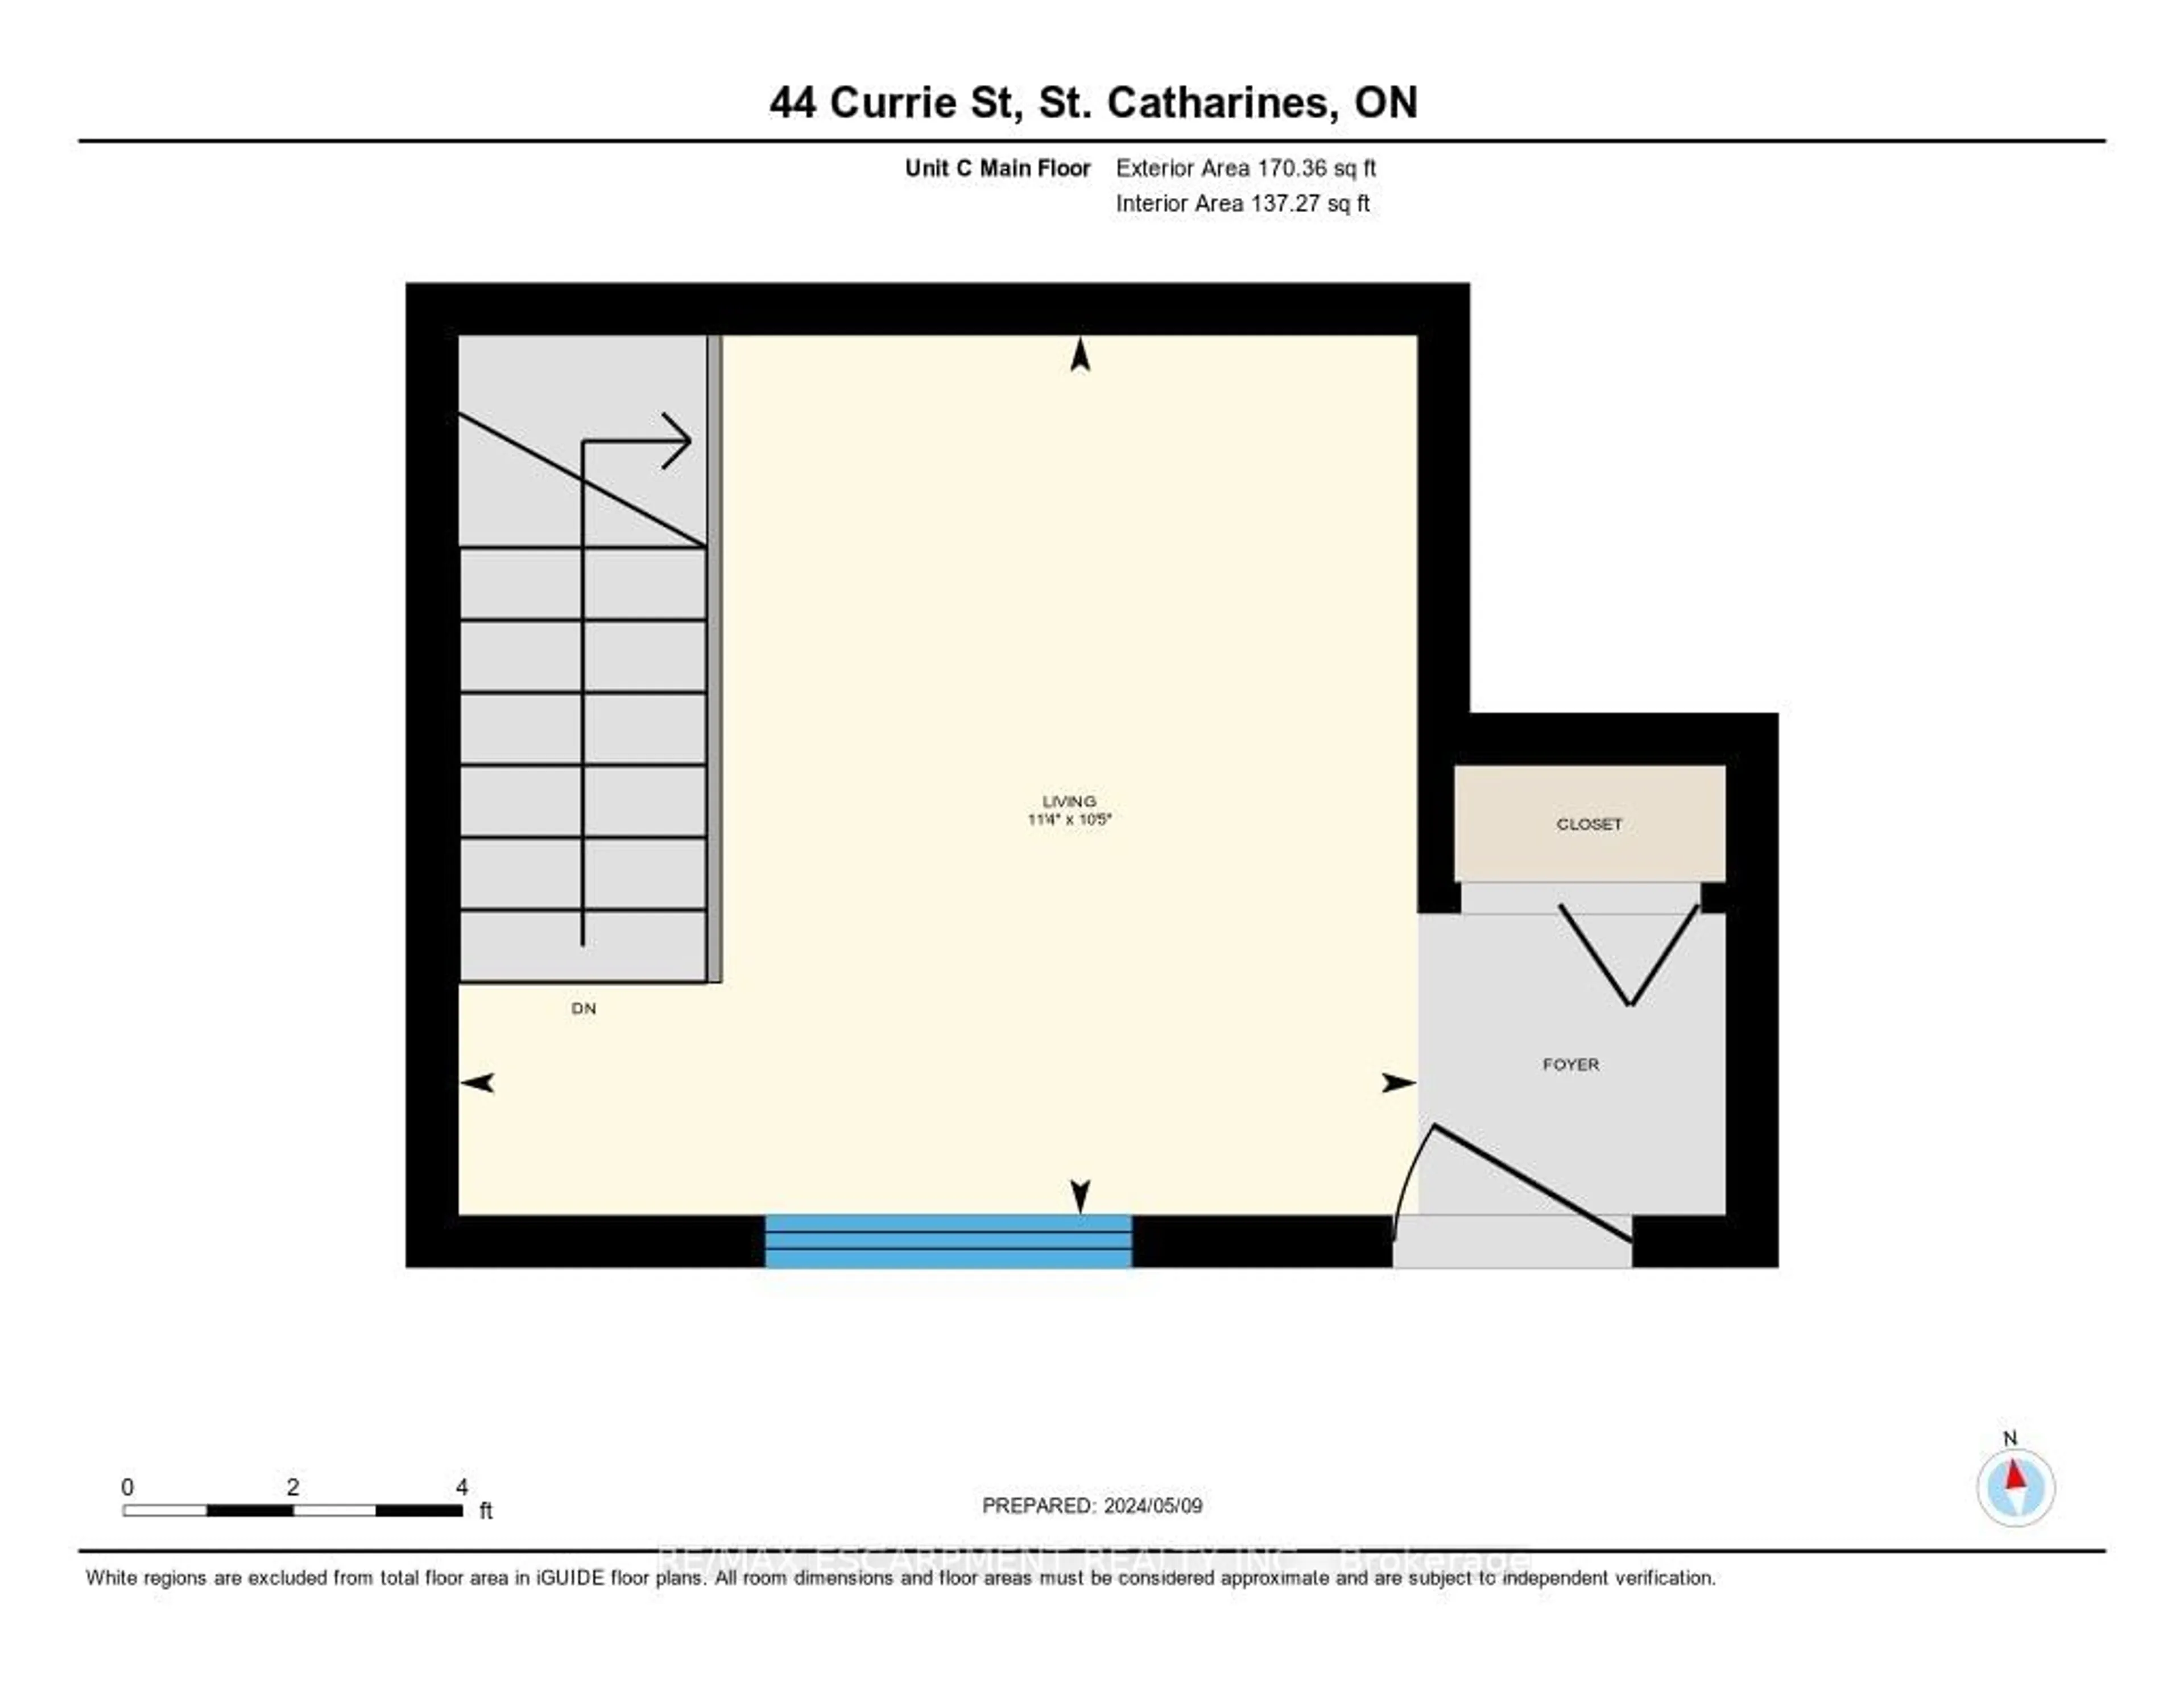 Floor plan for 44 Currie St, St. Catharines Ontario L2M 5M8